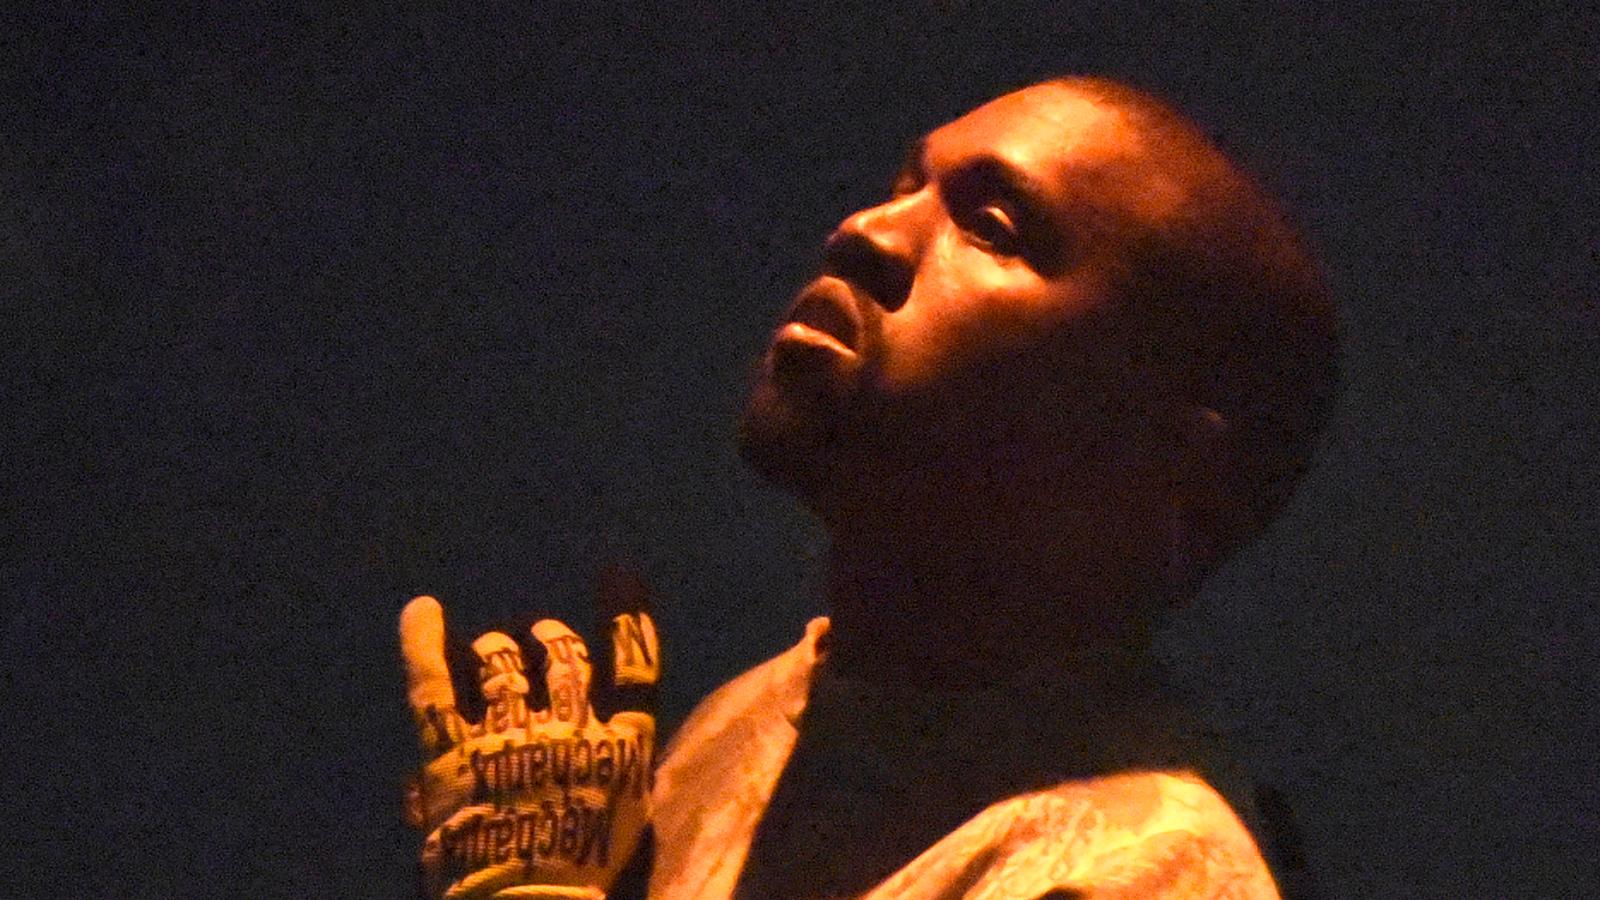 ”The most beautiful thoughts are always besides the darkest”. Så börjar Kanye Wests album ”Ye”. 